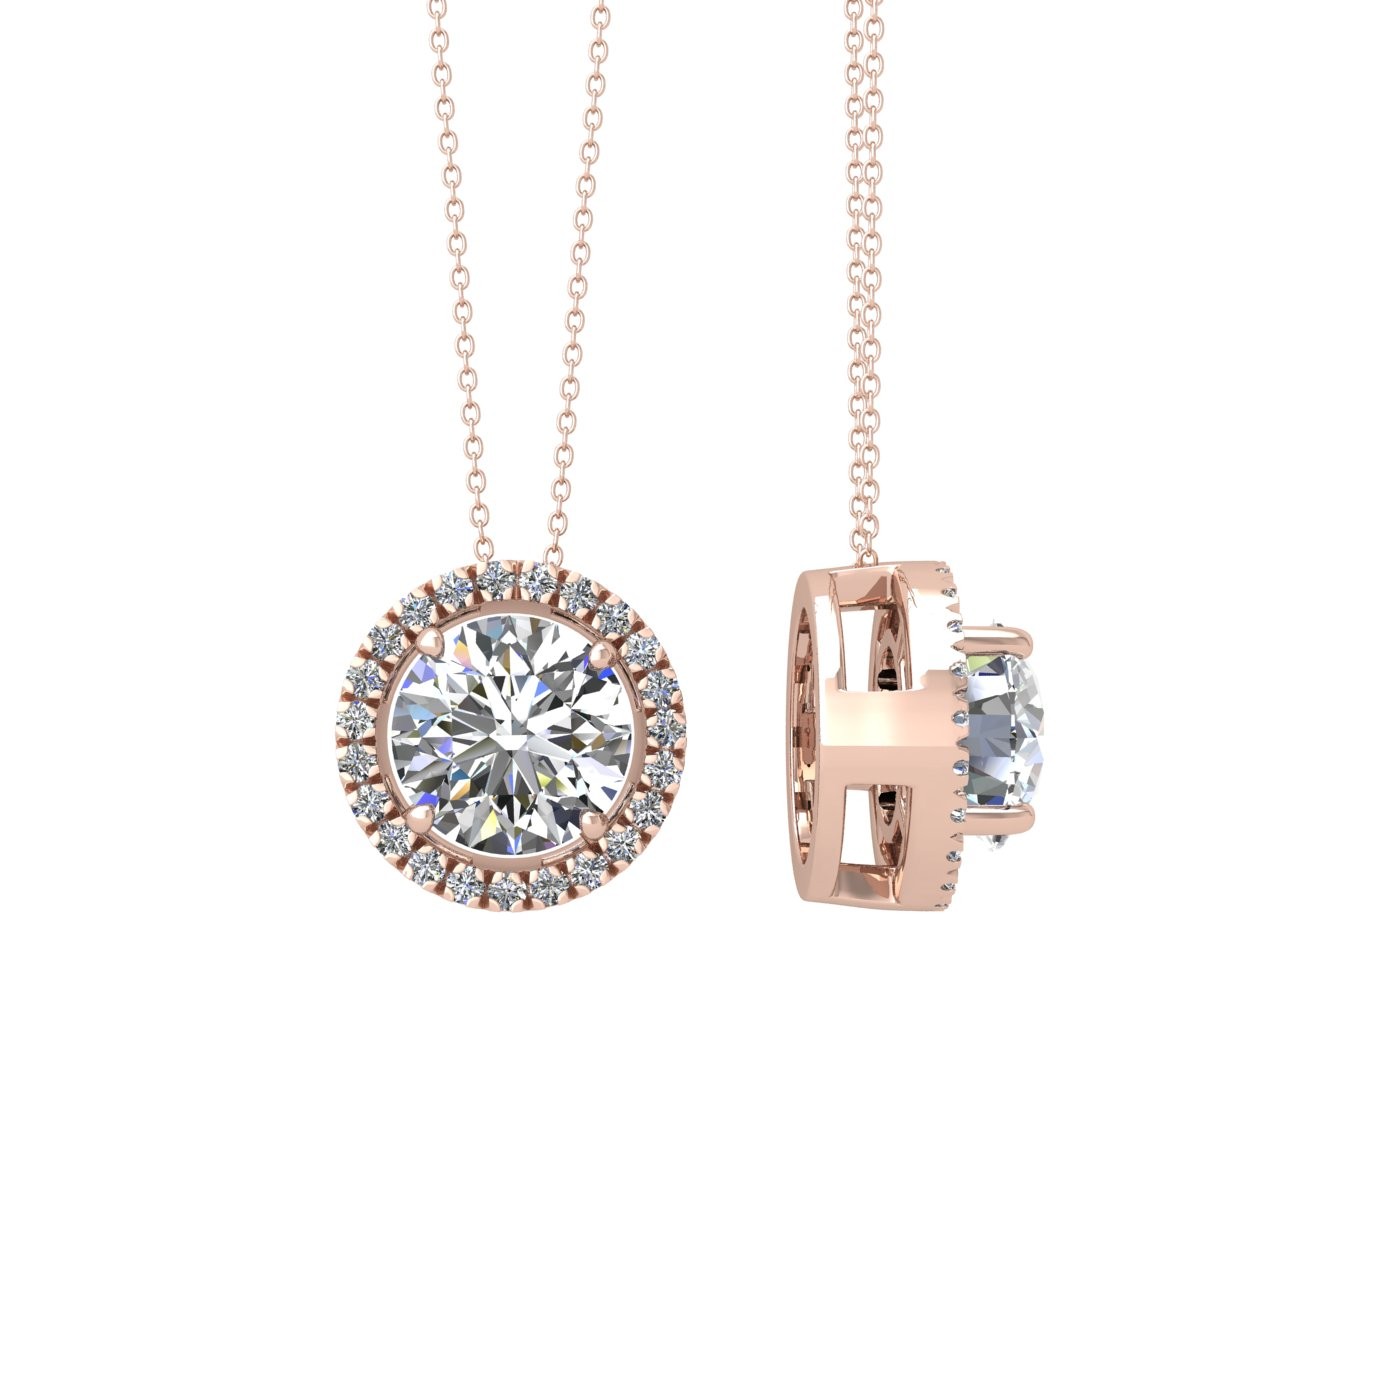 18k rose gold  2.5 ct 4 prong round shape diamond pendant with diamond pavÉ set halo including chain seperate from the pendant Photos & images